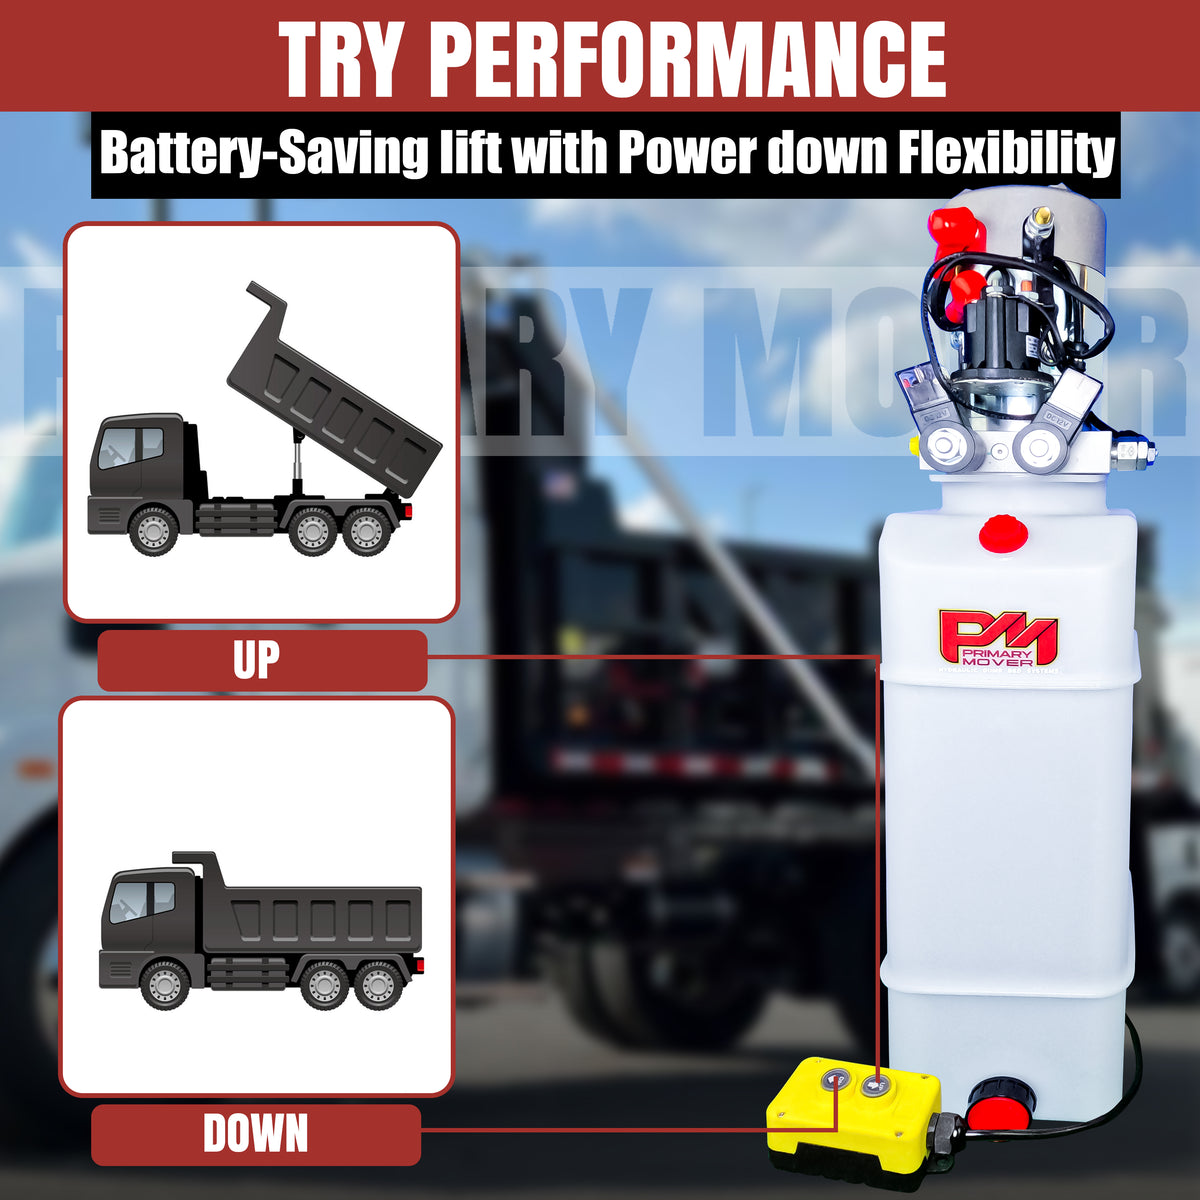 Primary Mover 12V Double-Acting Hydraulic Pump - Poly Reservoir for hydraulic dump bed systems. Dual-acting precision, tailored for efficiency, quality craftsmanship, and value-driven performance.